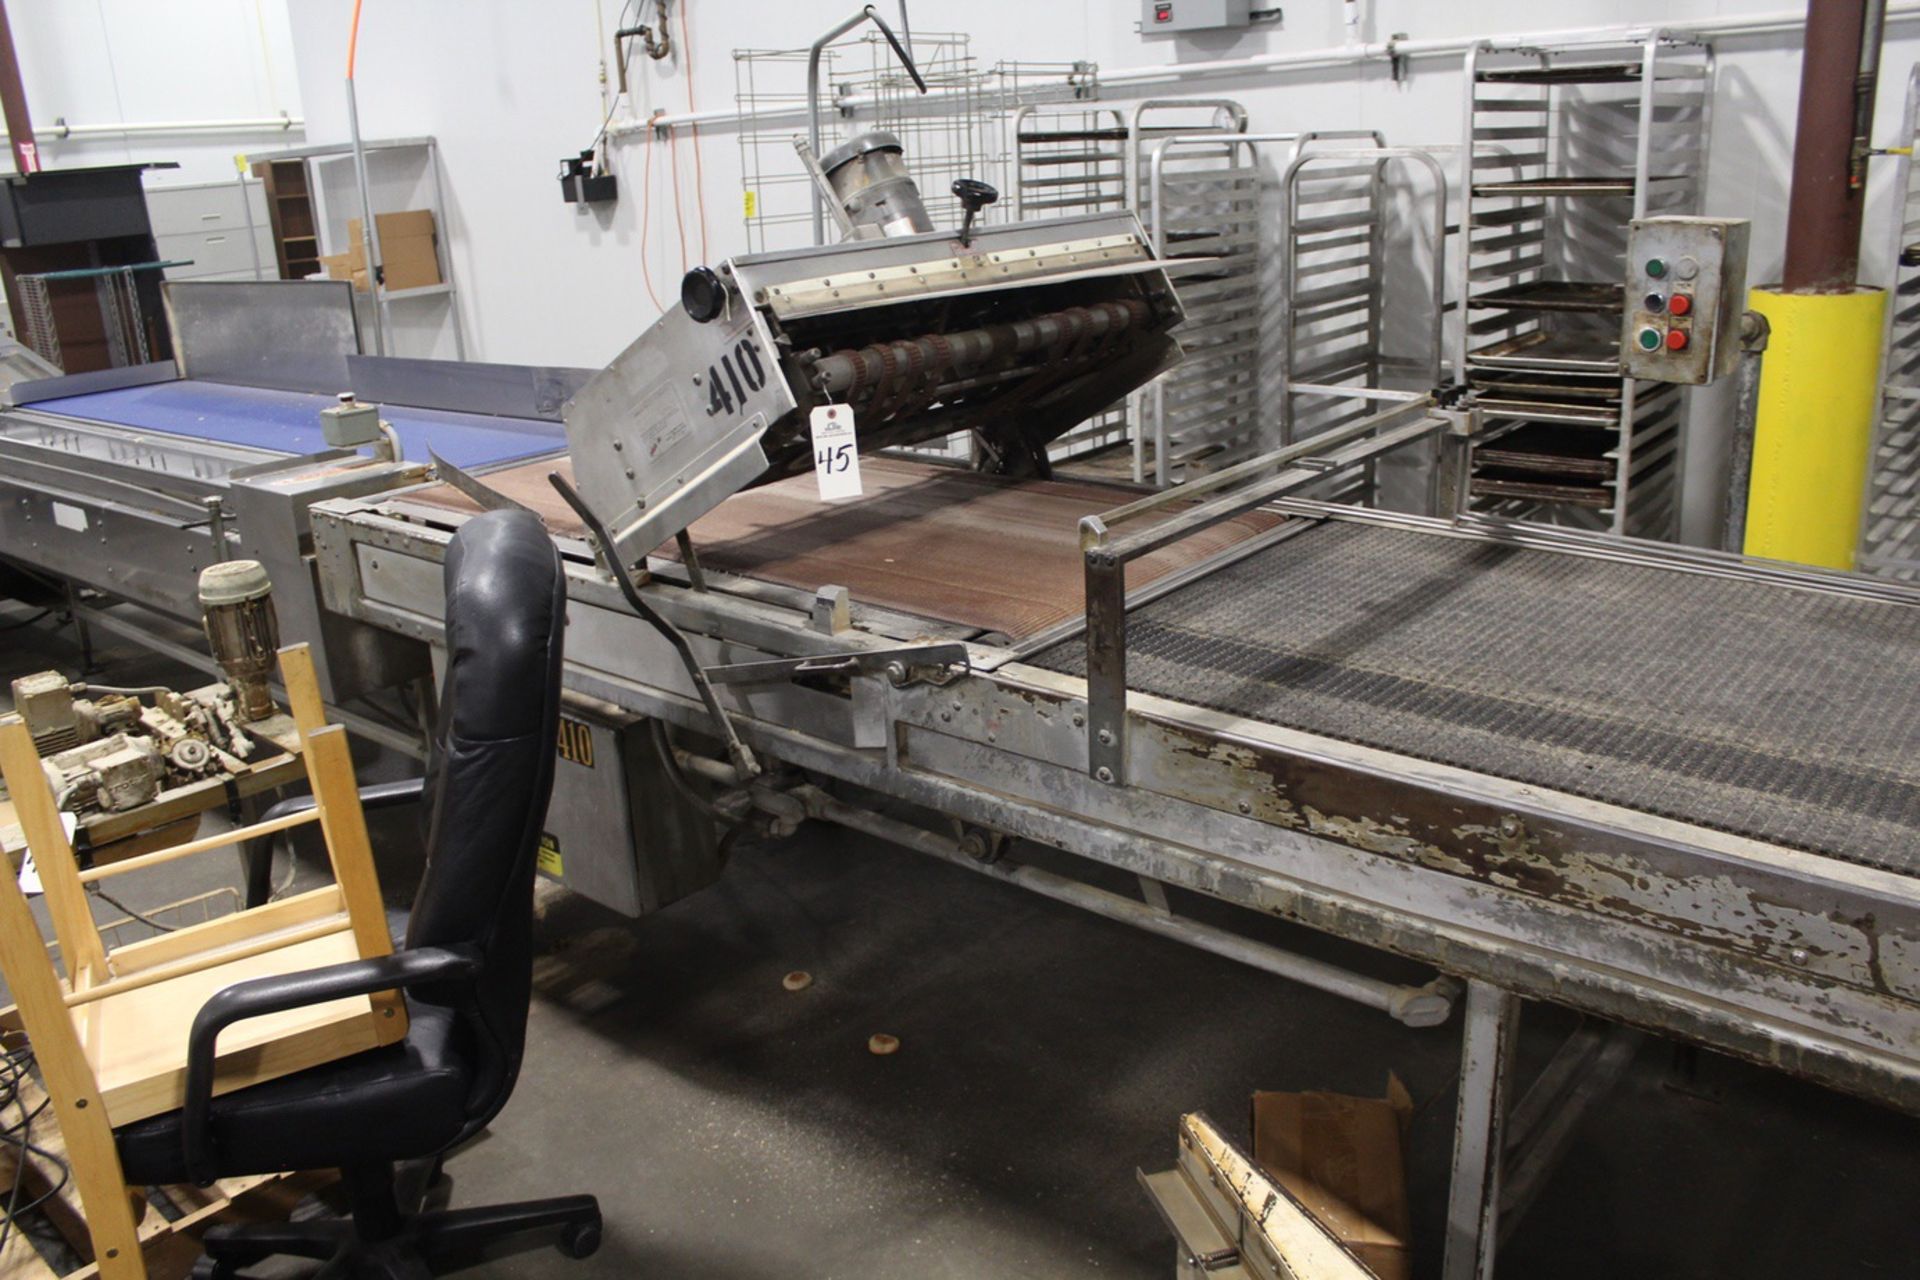 Modular Roll Slicing Systems Roll Slicer, S/N 11331289 | Rigging and Loading Fee: $300